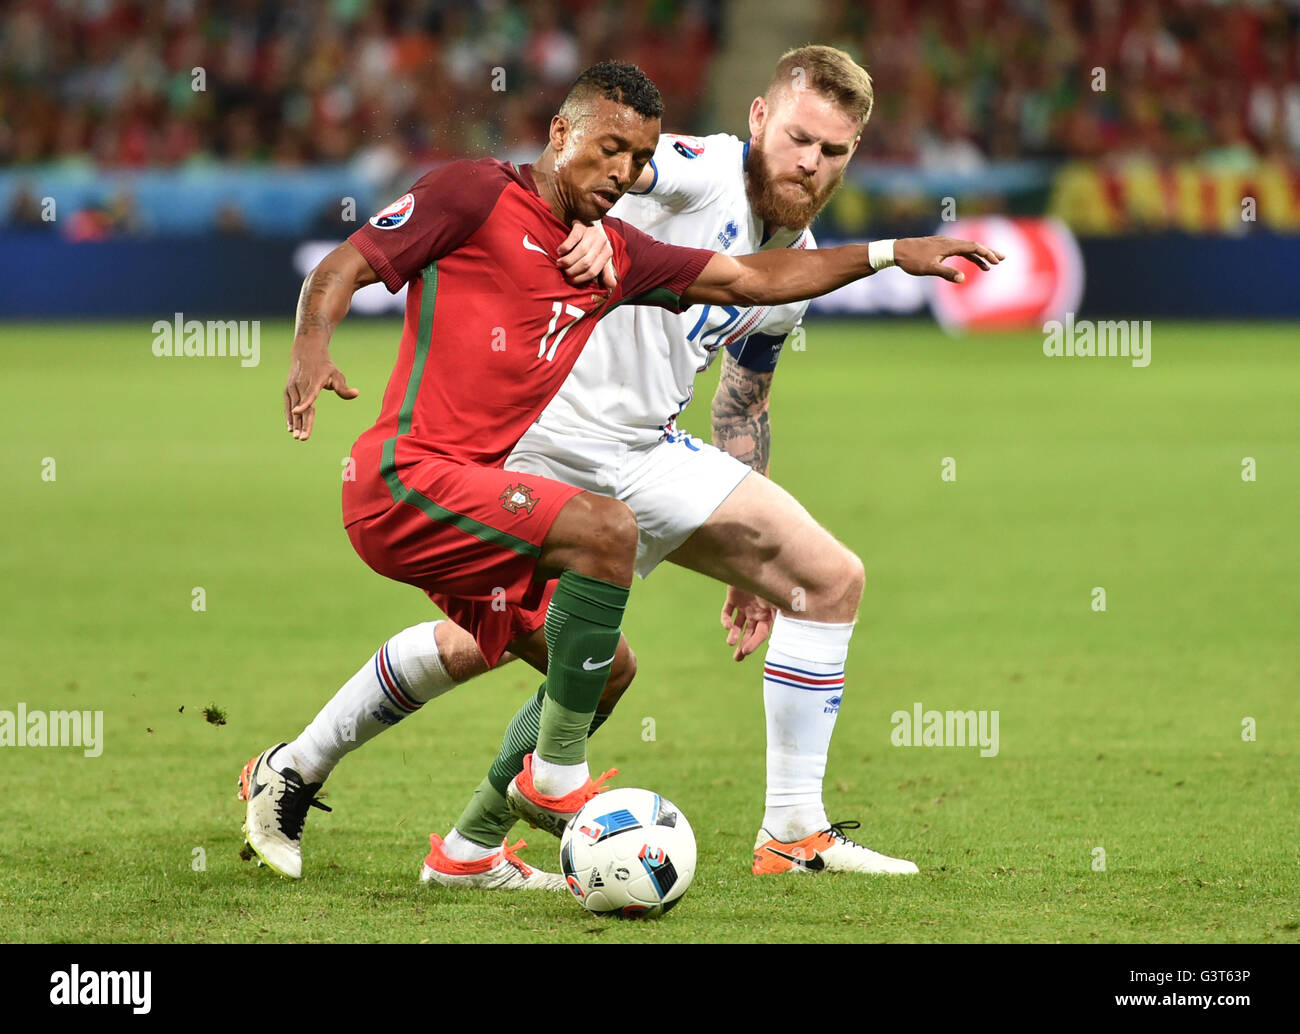 Saint-Etienne, France. 14th June, 2016. Nani (L) of Portugal and Aron Gunnarsson of Iceland vie for the ball during the UEFA Euro 2016 Group F soccer match Portugal vs. Iceland at Stade Geoffroy Guichard in Saint-Etienne, France, 14 June 2016. Photo: Uwe Anspach/dpa/Alamy Live News Stock Photo